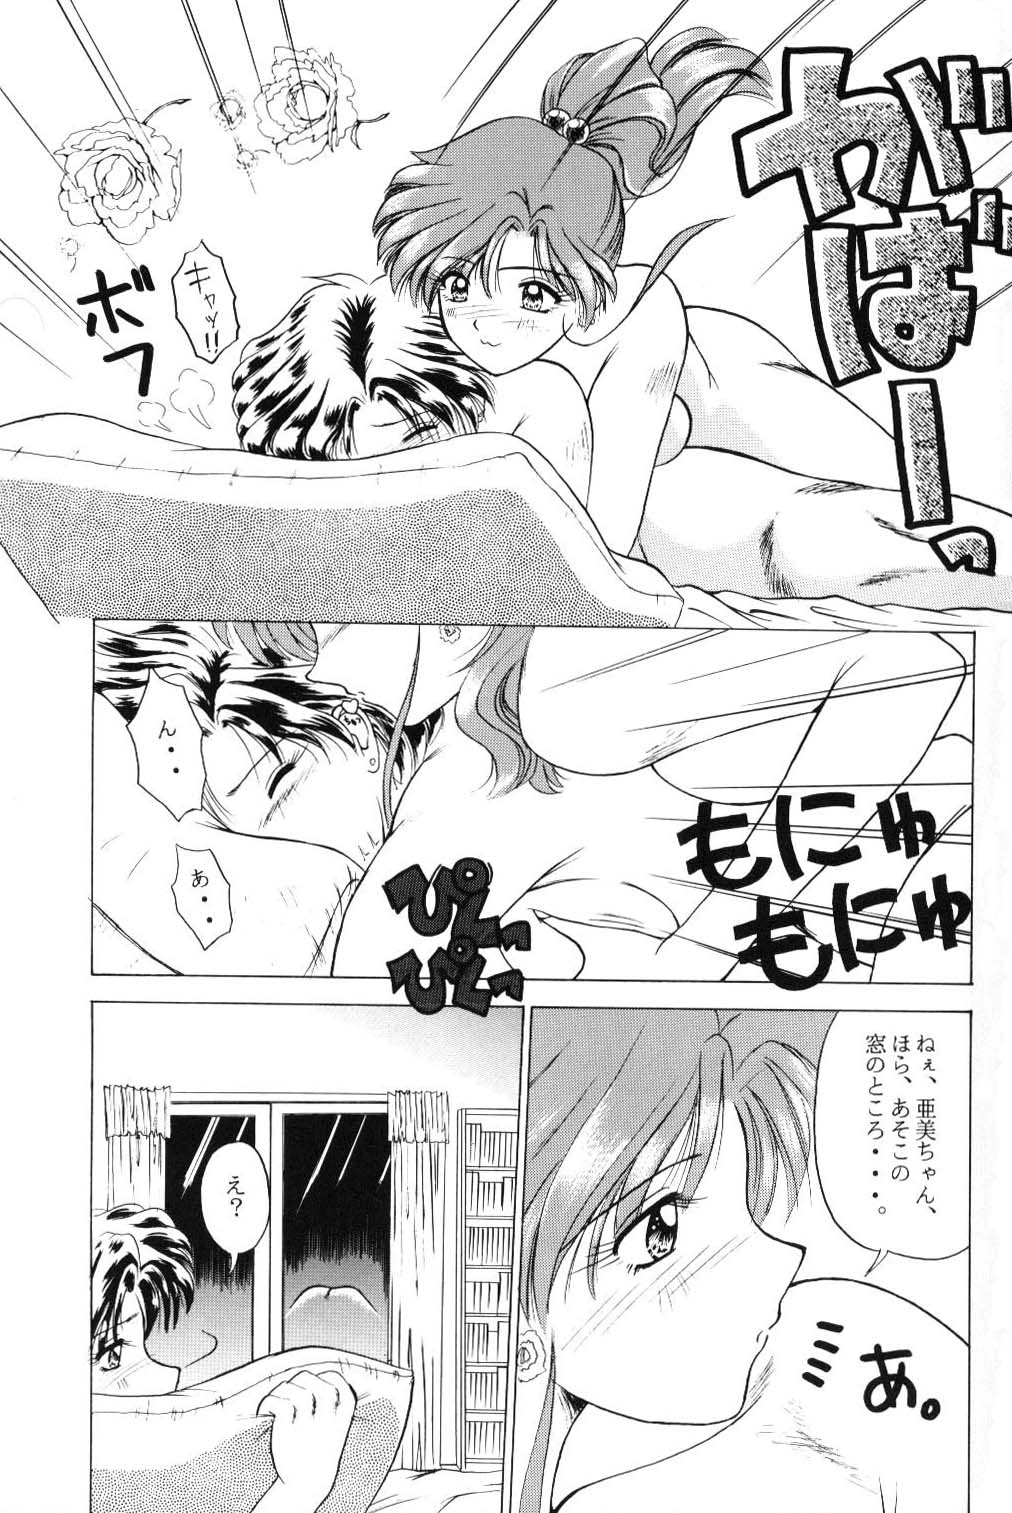 (C51) [T-press (ToWeR)] The only thing I need is U (Bishoujo Senshi Sailor Moon) page 12 full